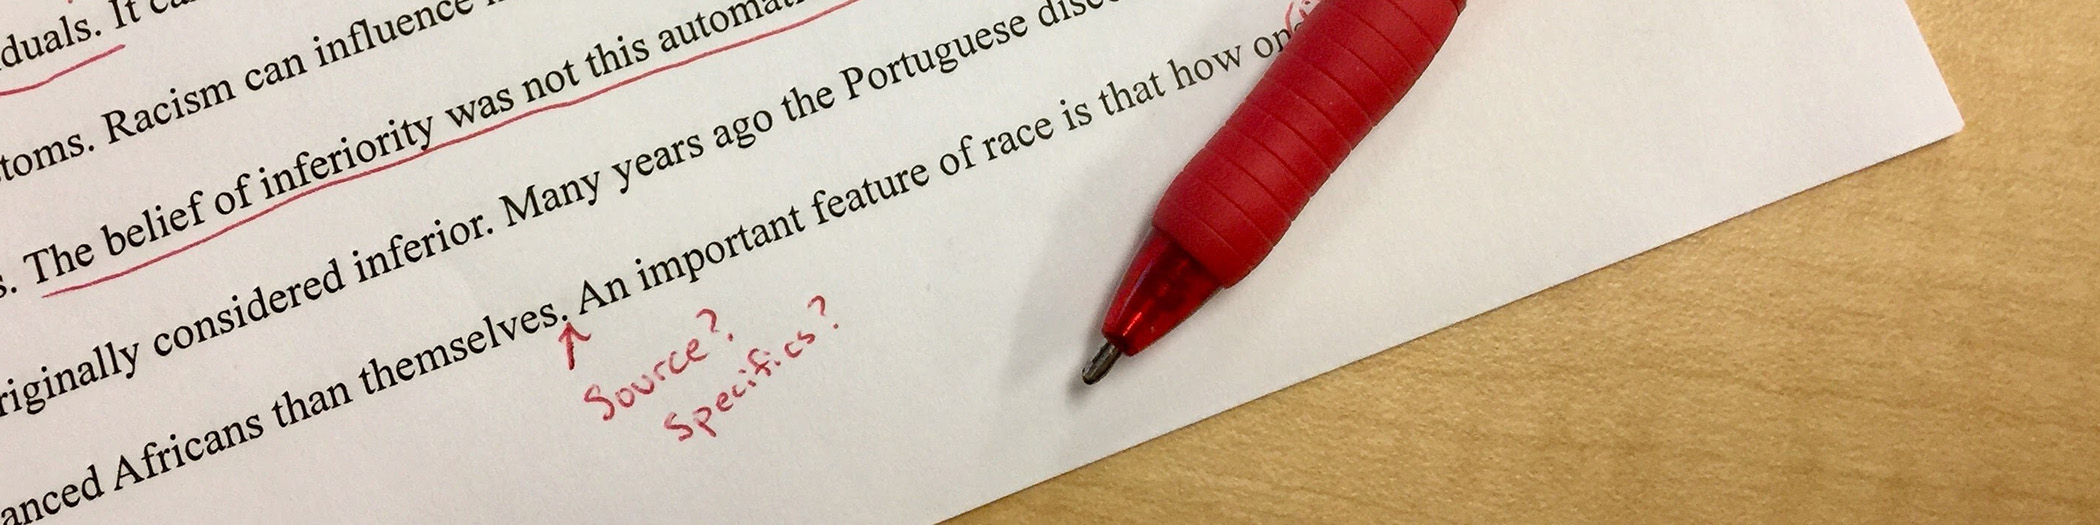 Red pen editing banner